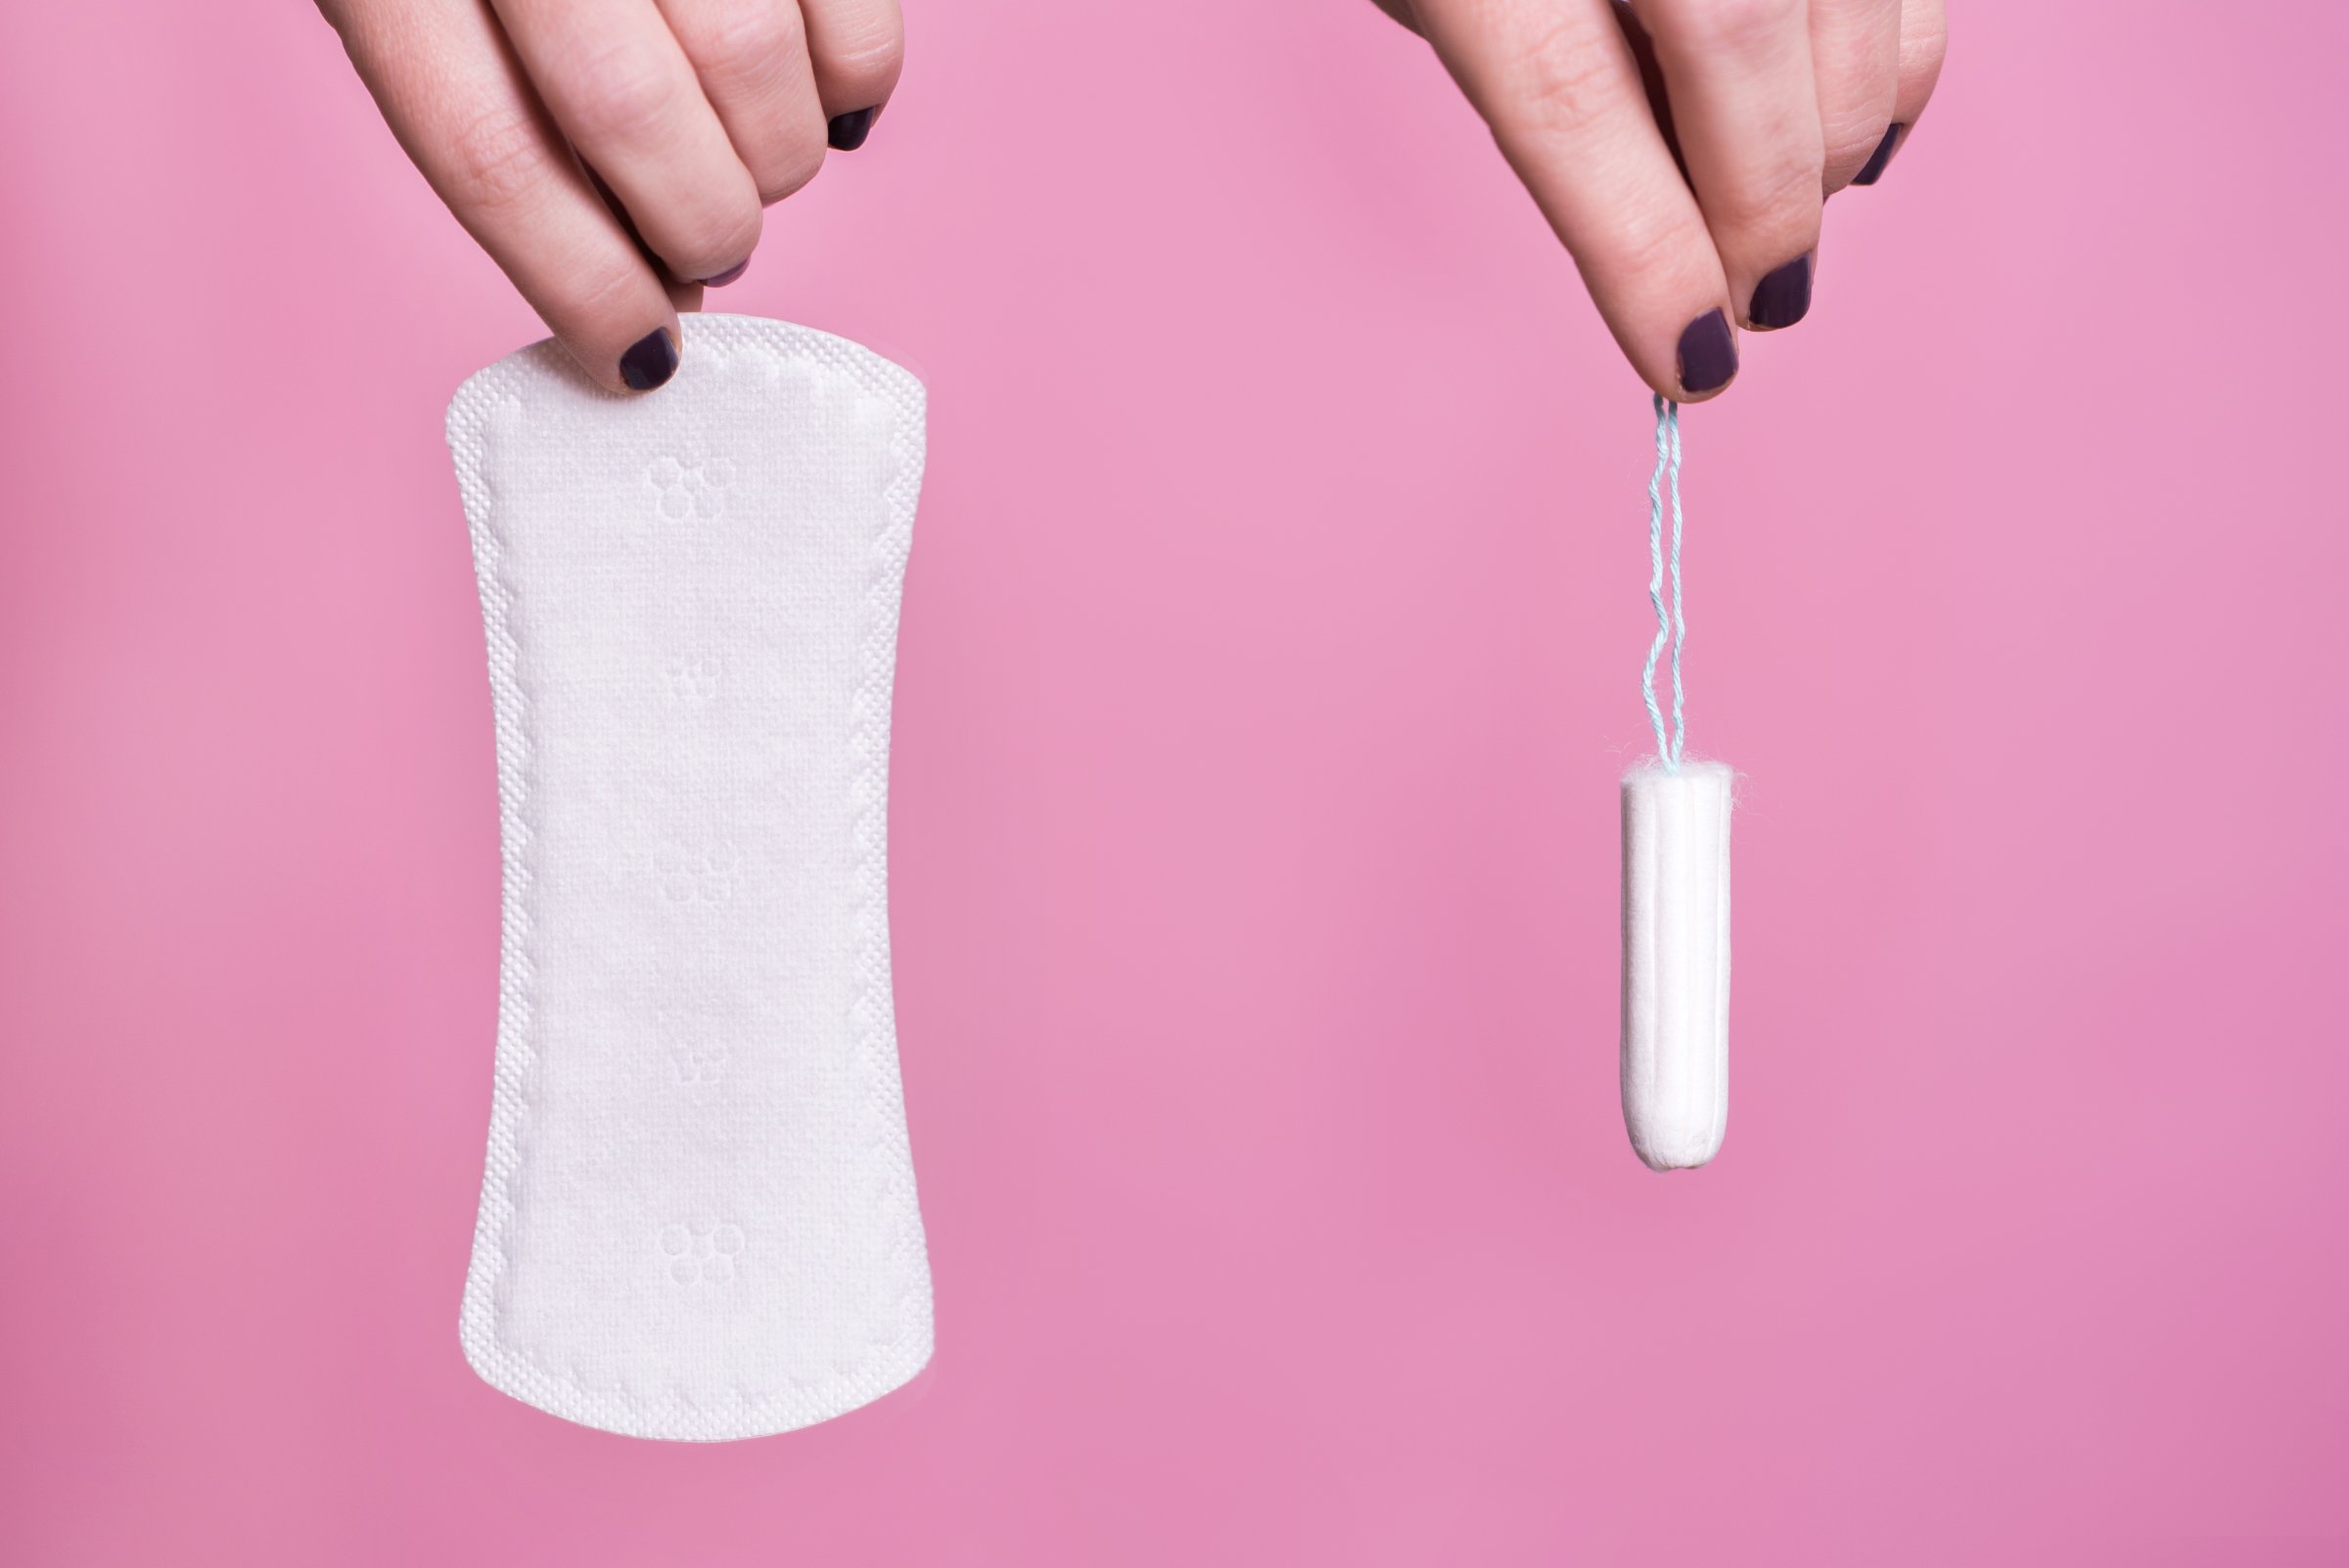 Women holding a sanitary napkin and tampon